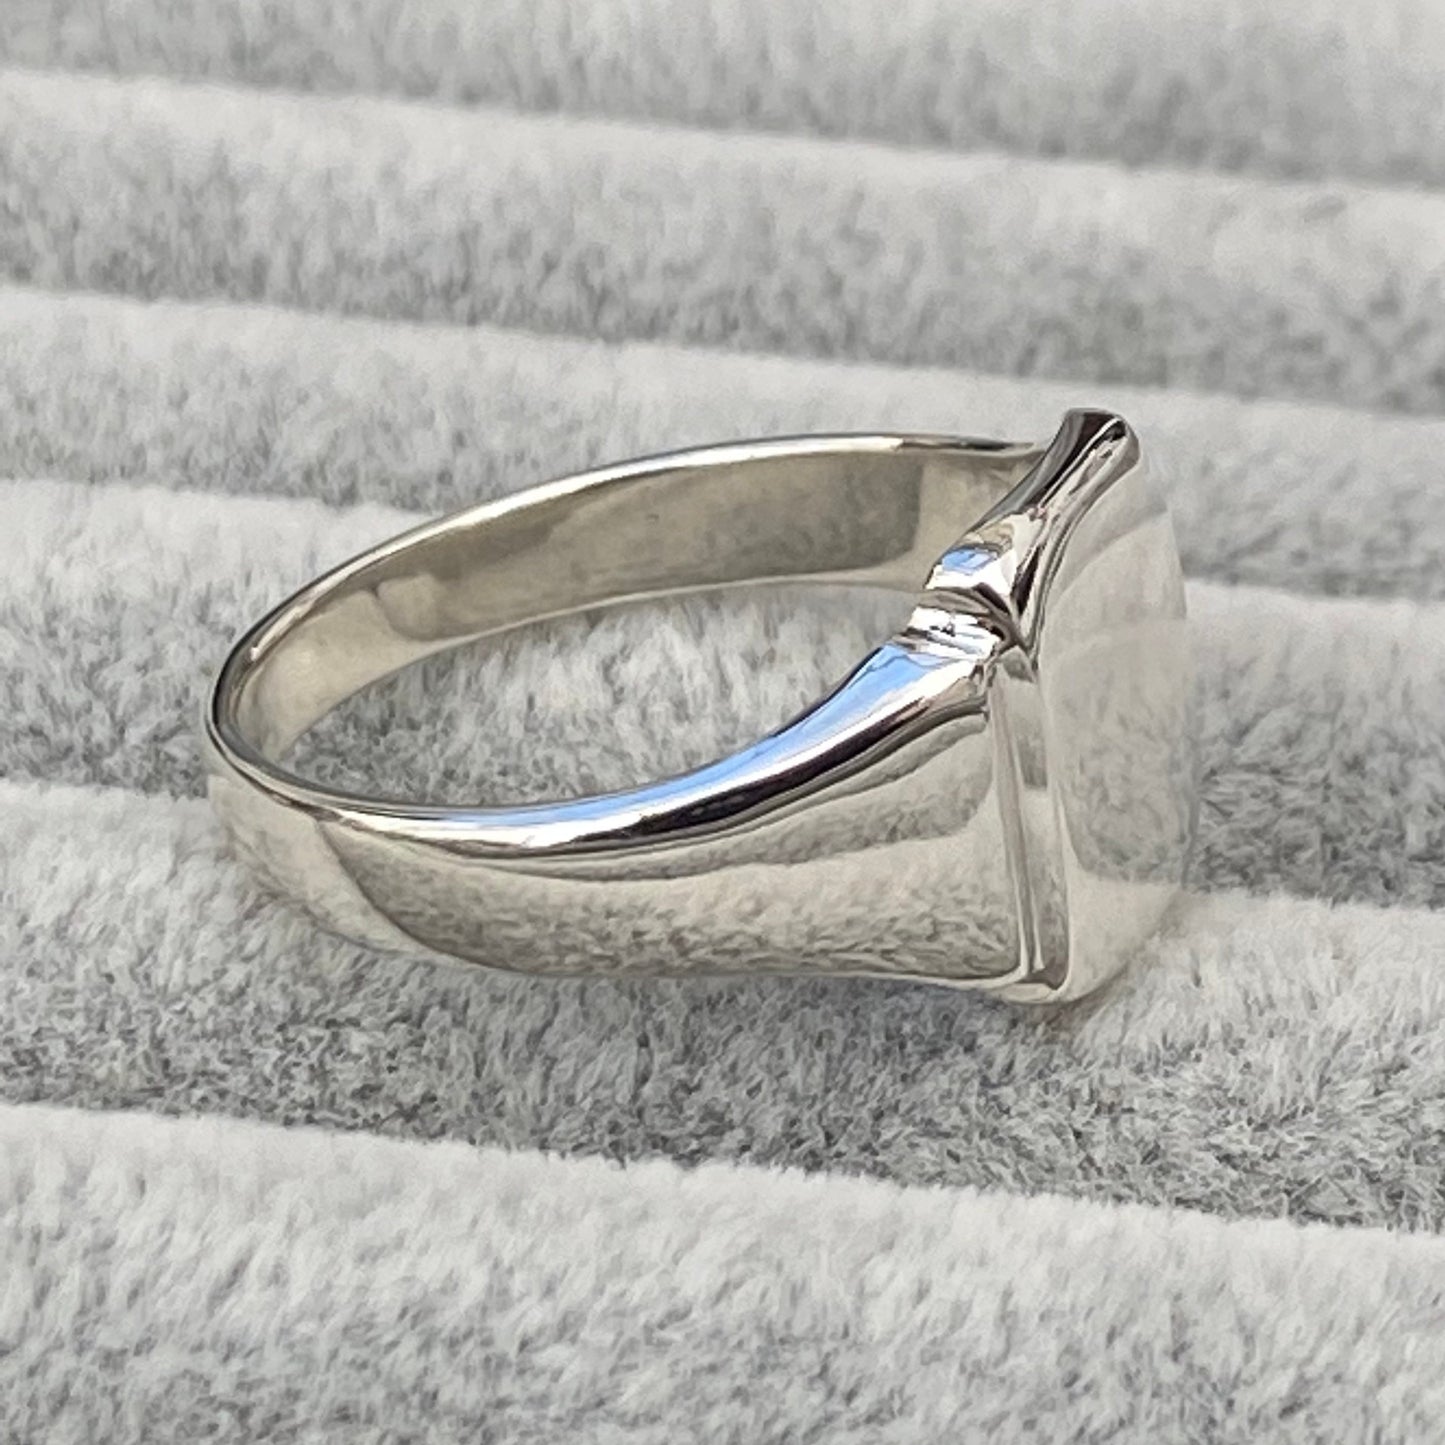 Handmade to order - Vintage inspired silver polished cushion signet ring